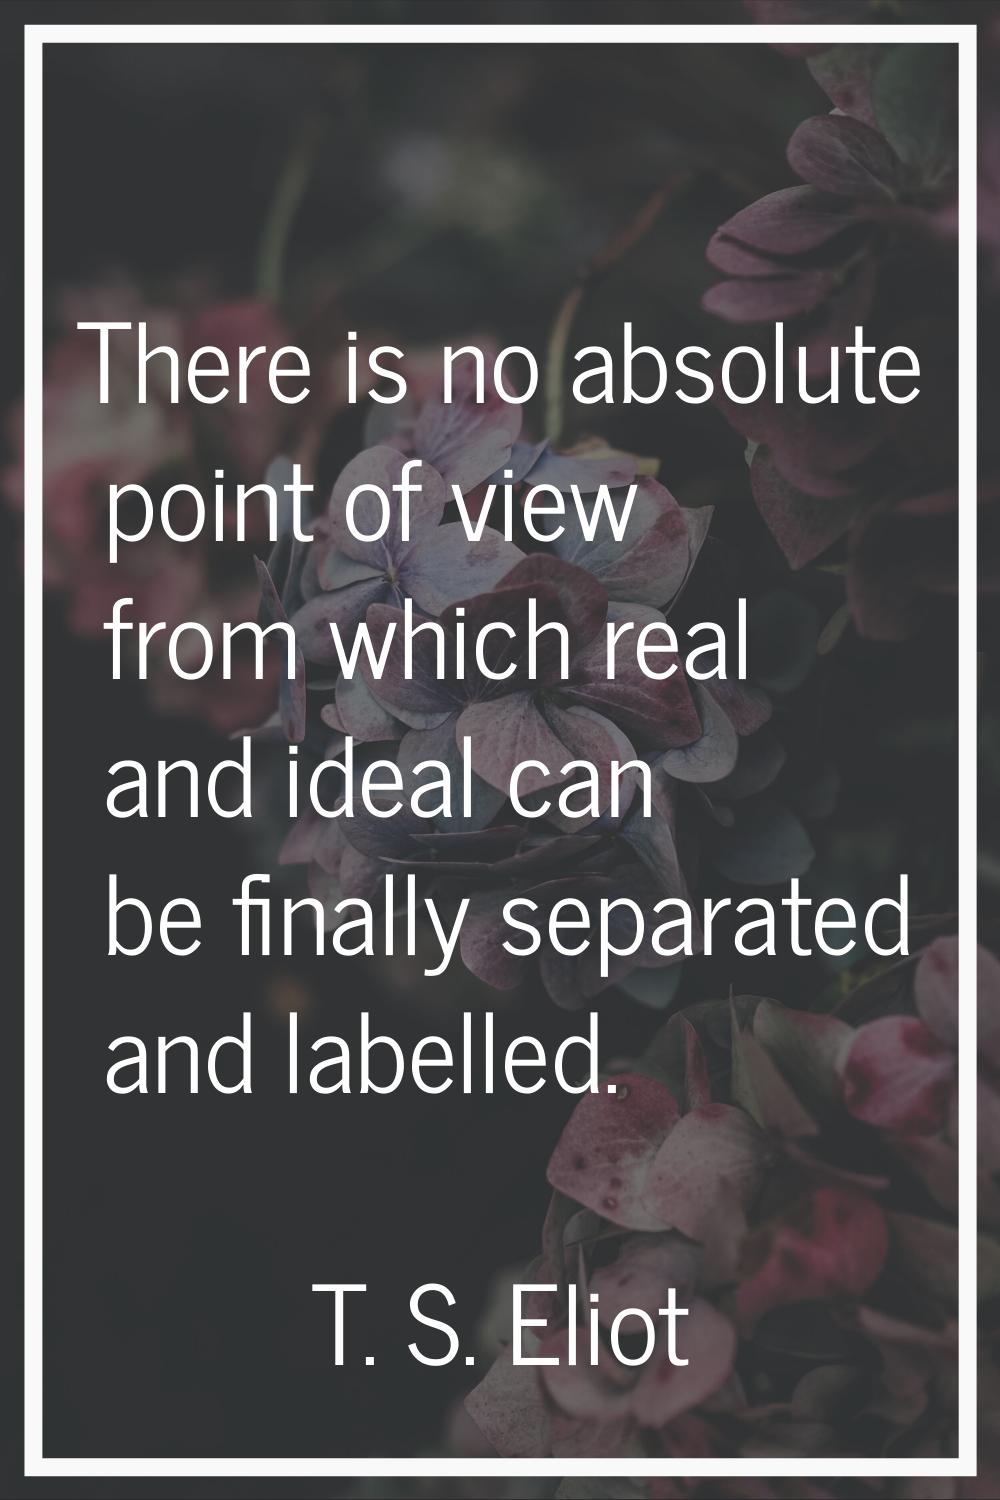 There is no absolute point of view from which real and ideal can be finally separated and labelled.